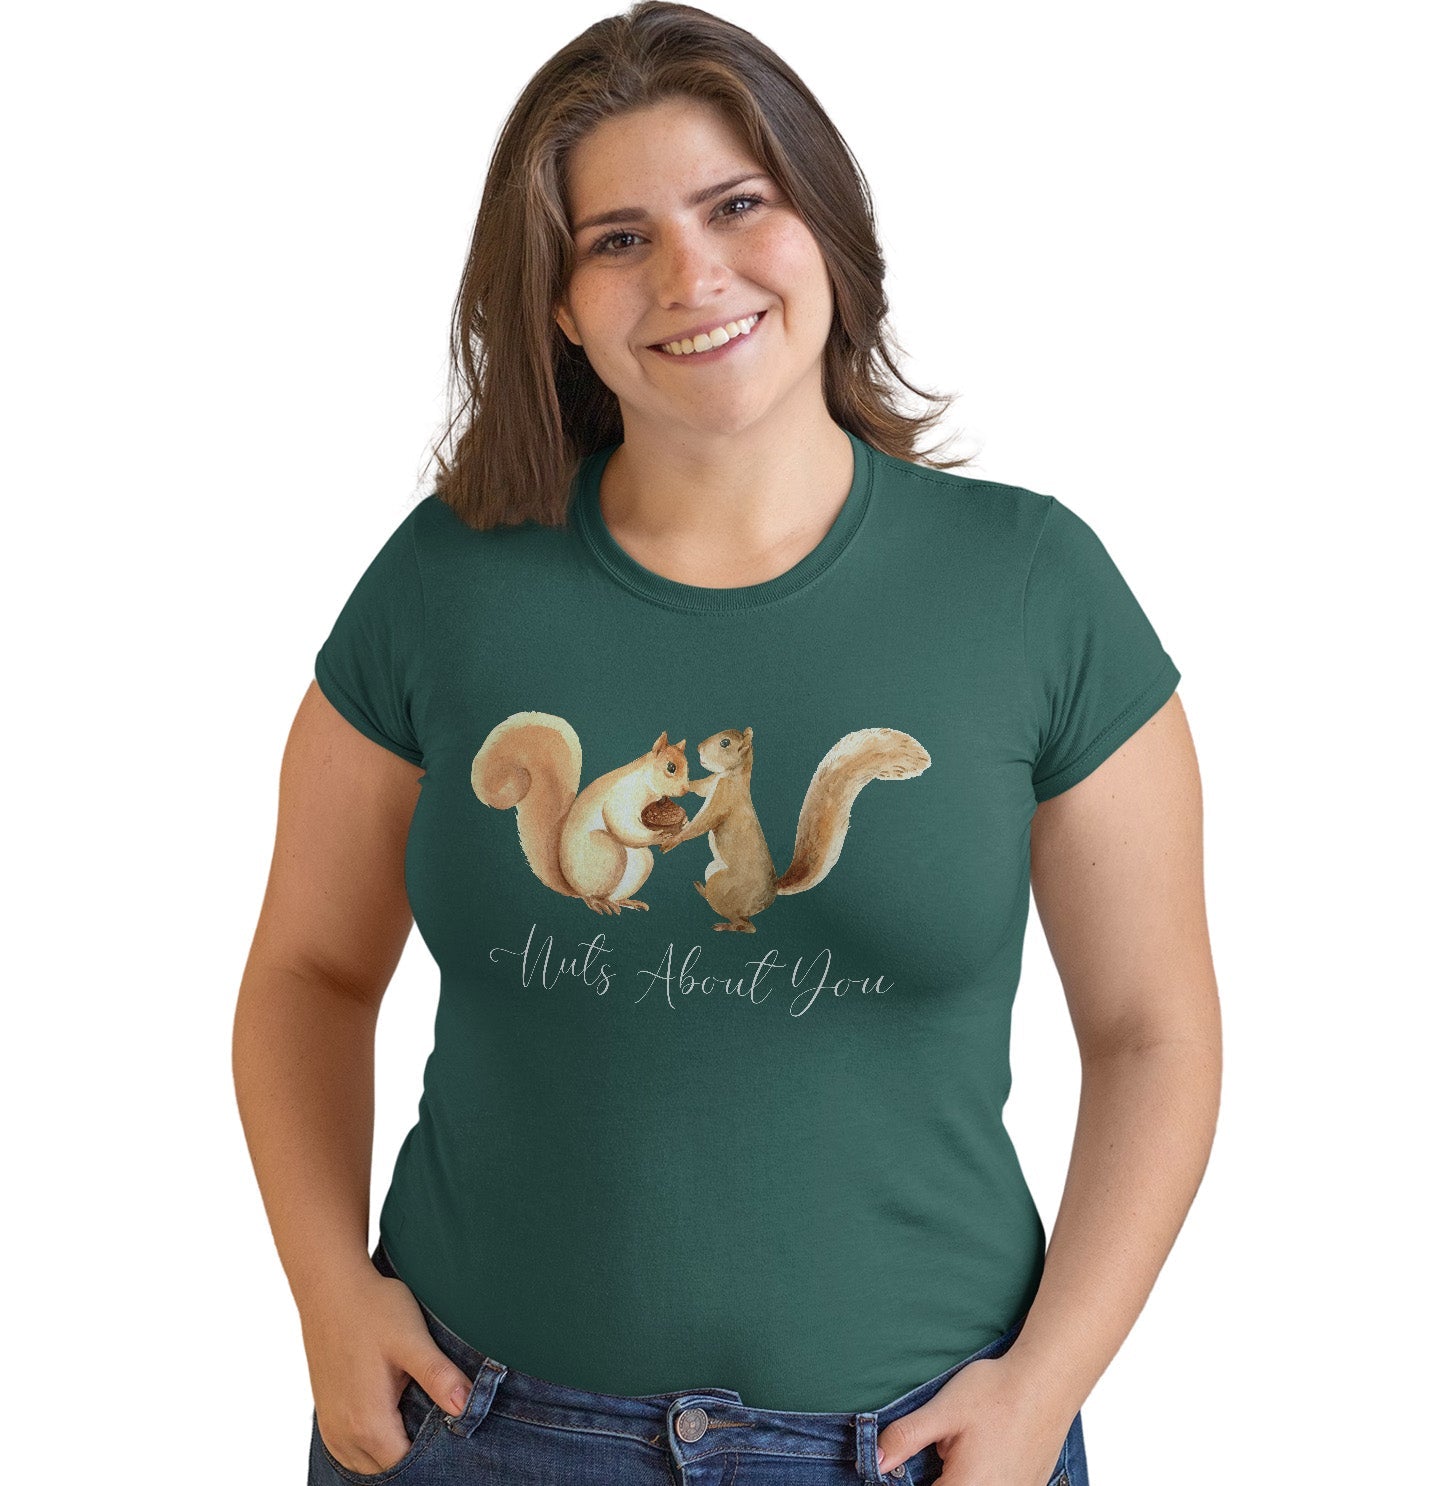 Nuts About You - Women's Fitted T-Shirt